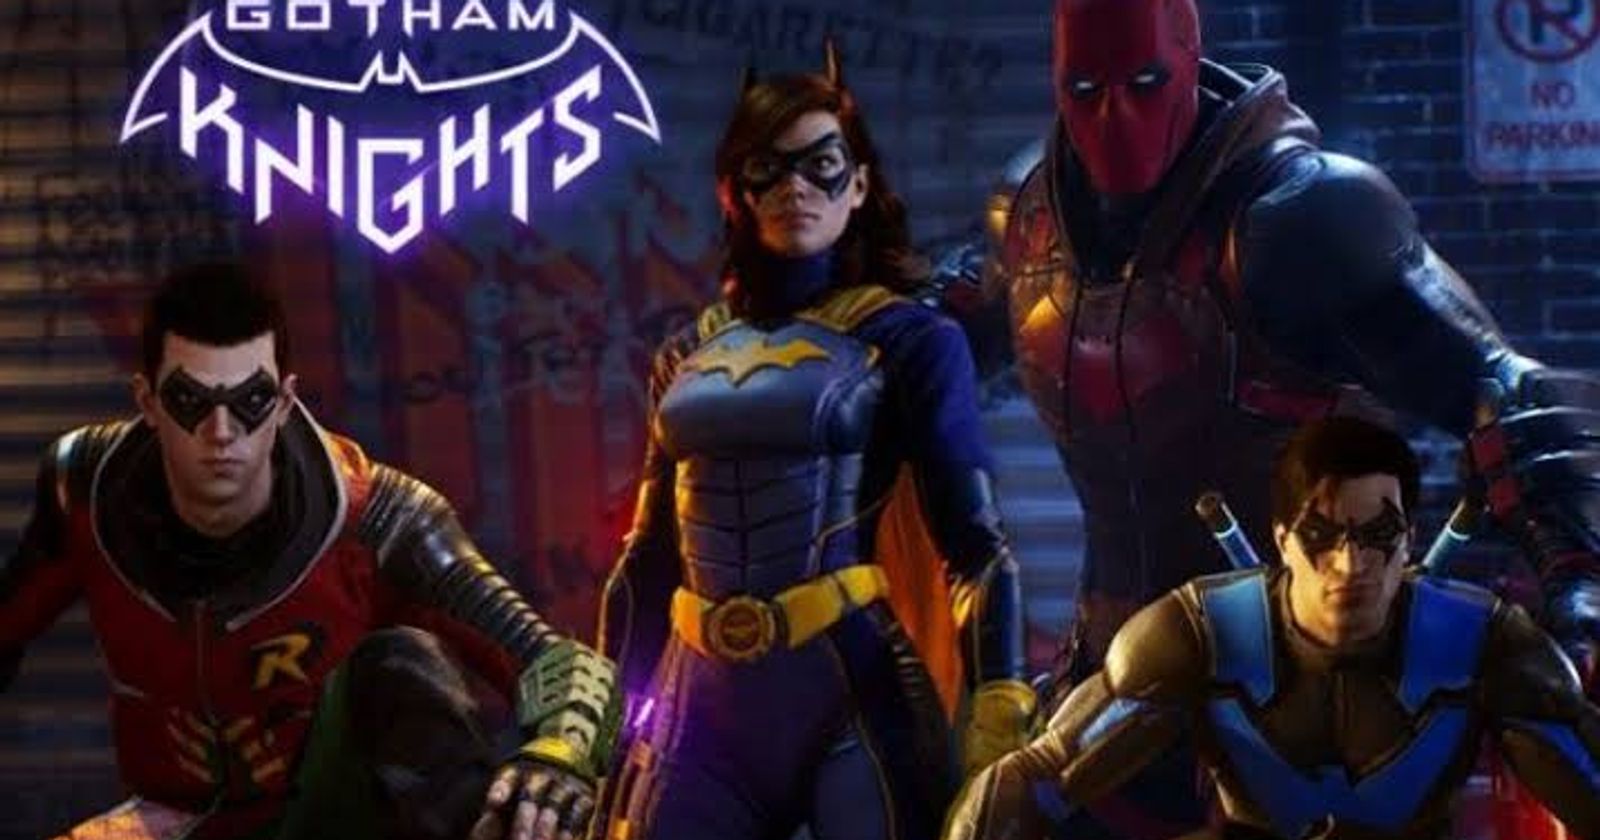 Gotham Knights Is Not Connected To The Arkham Games - Game Informer